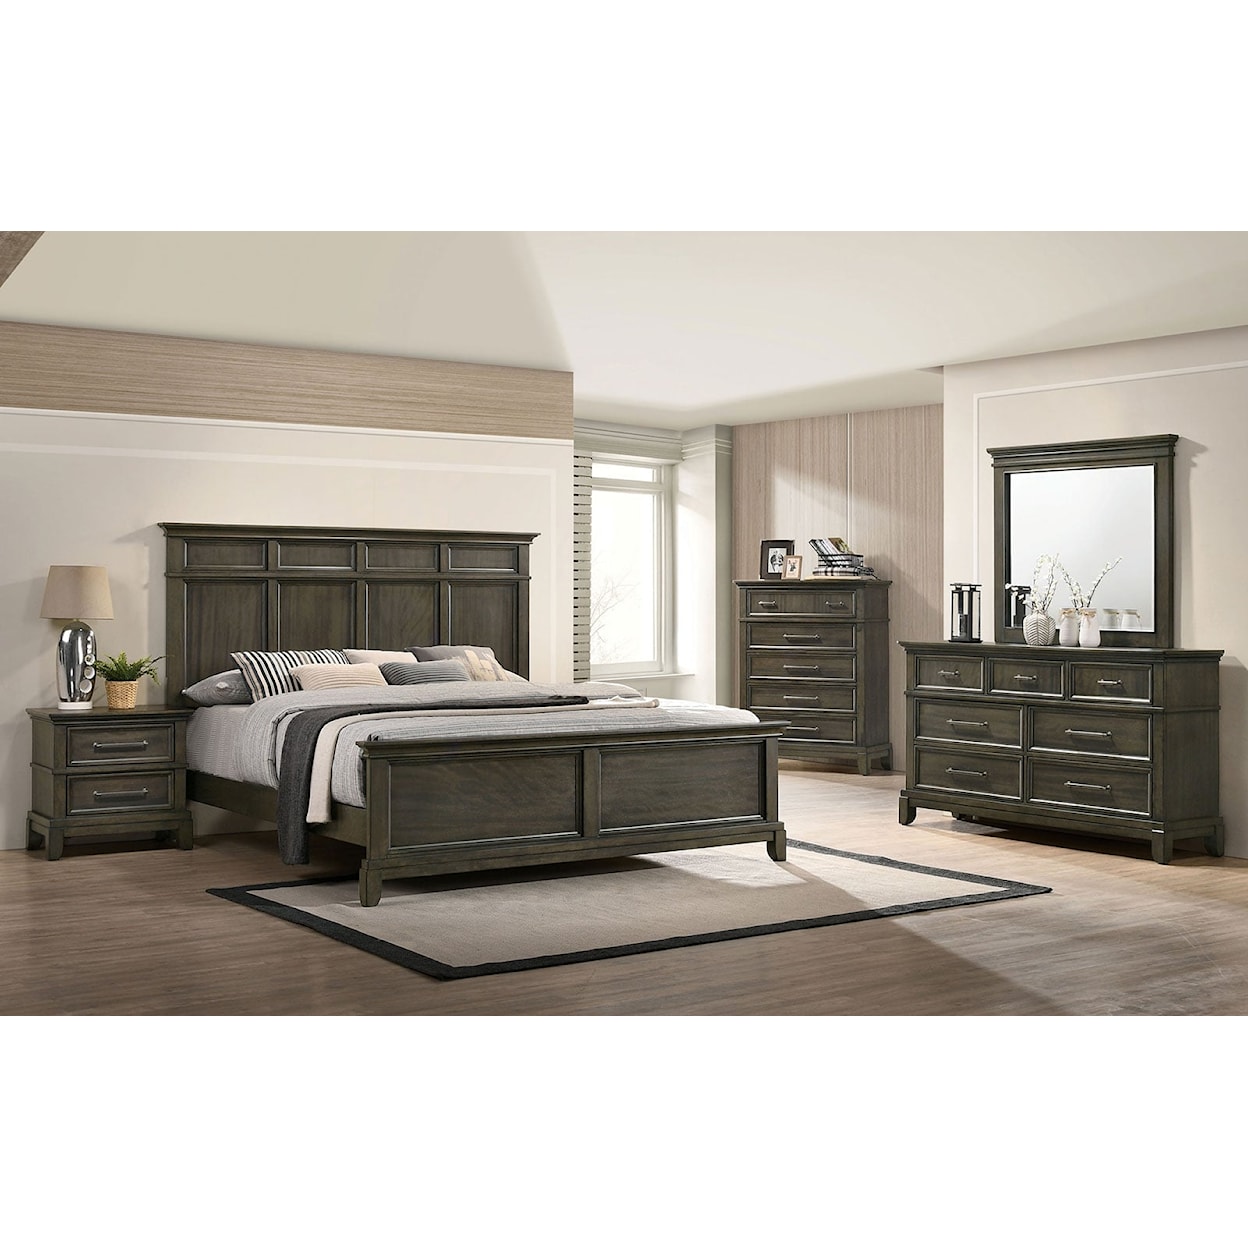 Furniture of America Houston Cal. King Panel Bed